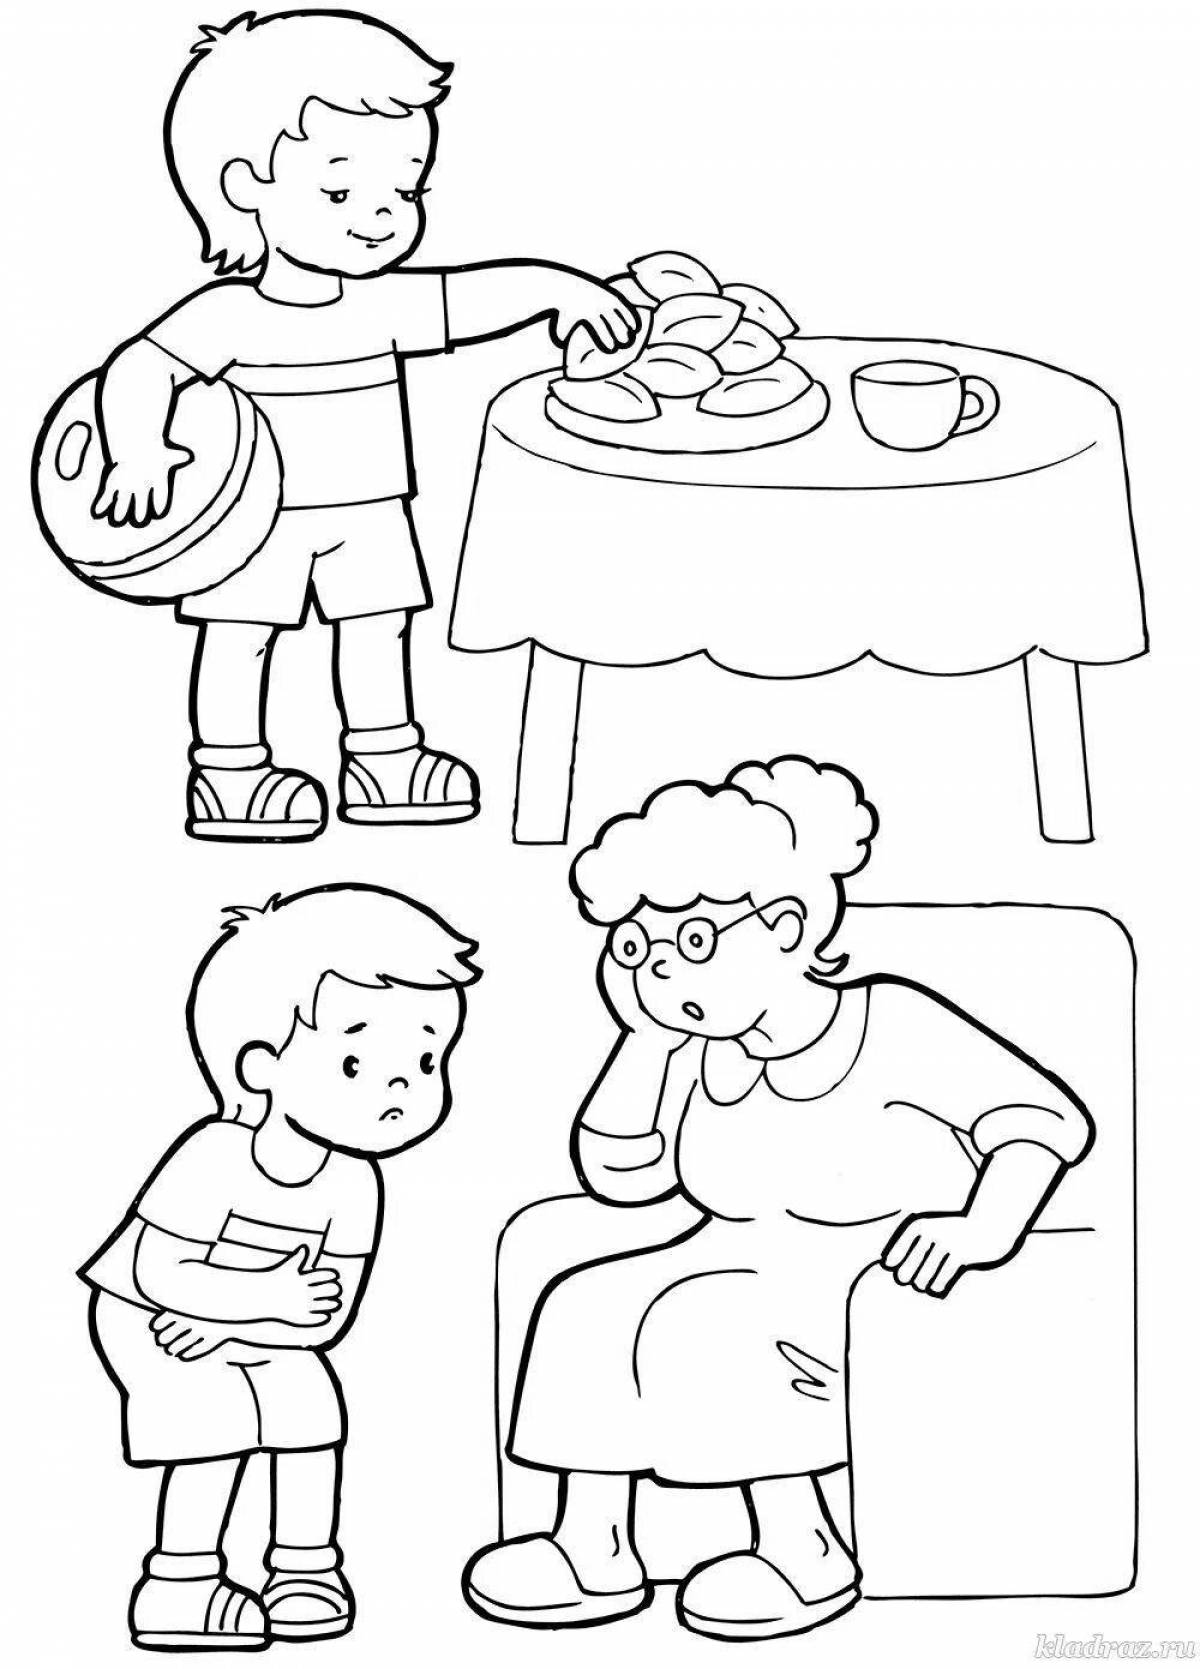 Positive Health Coloring Page for Seniors